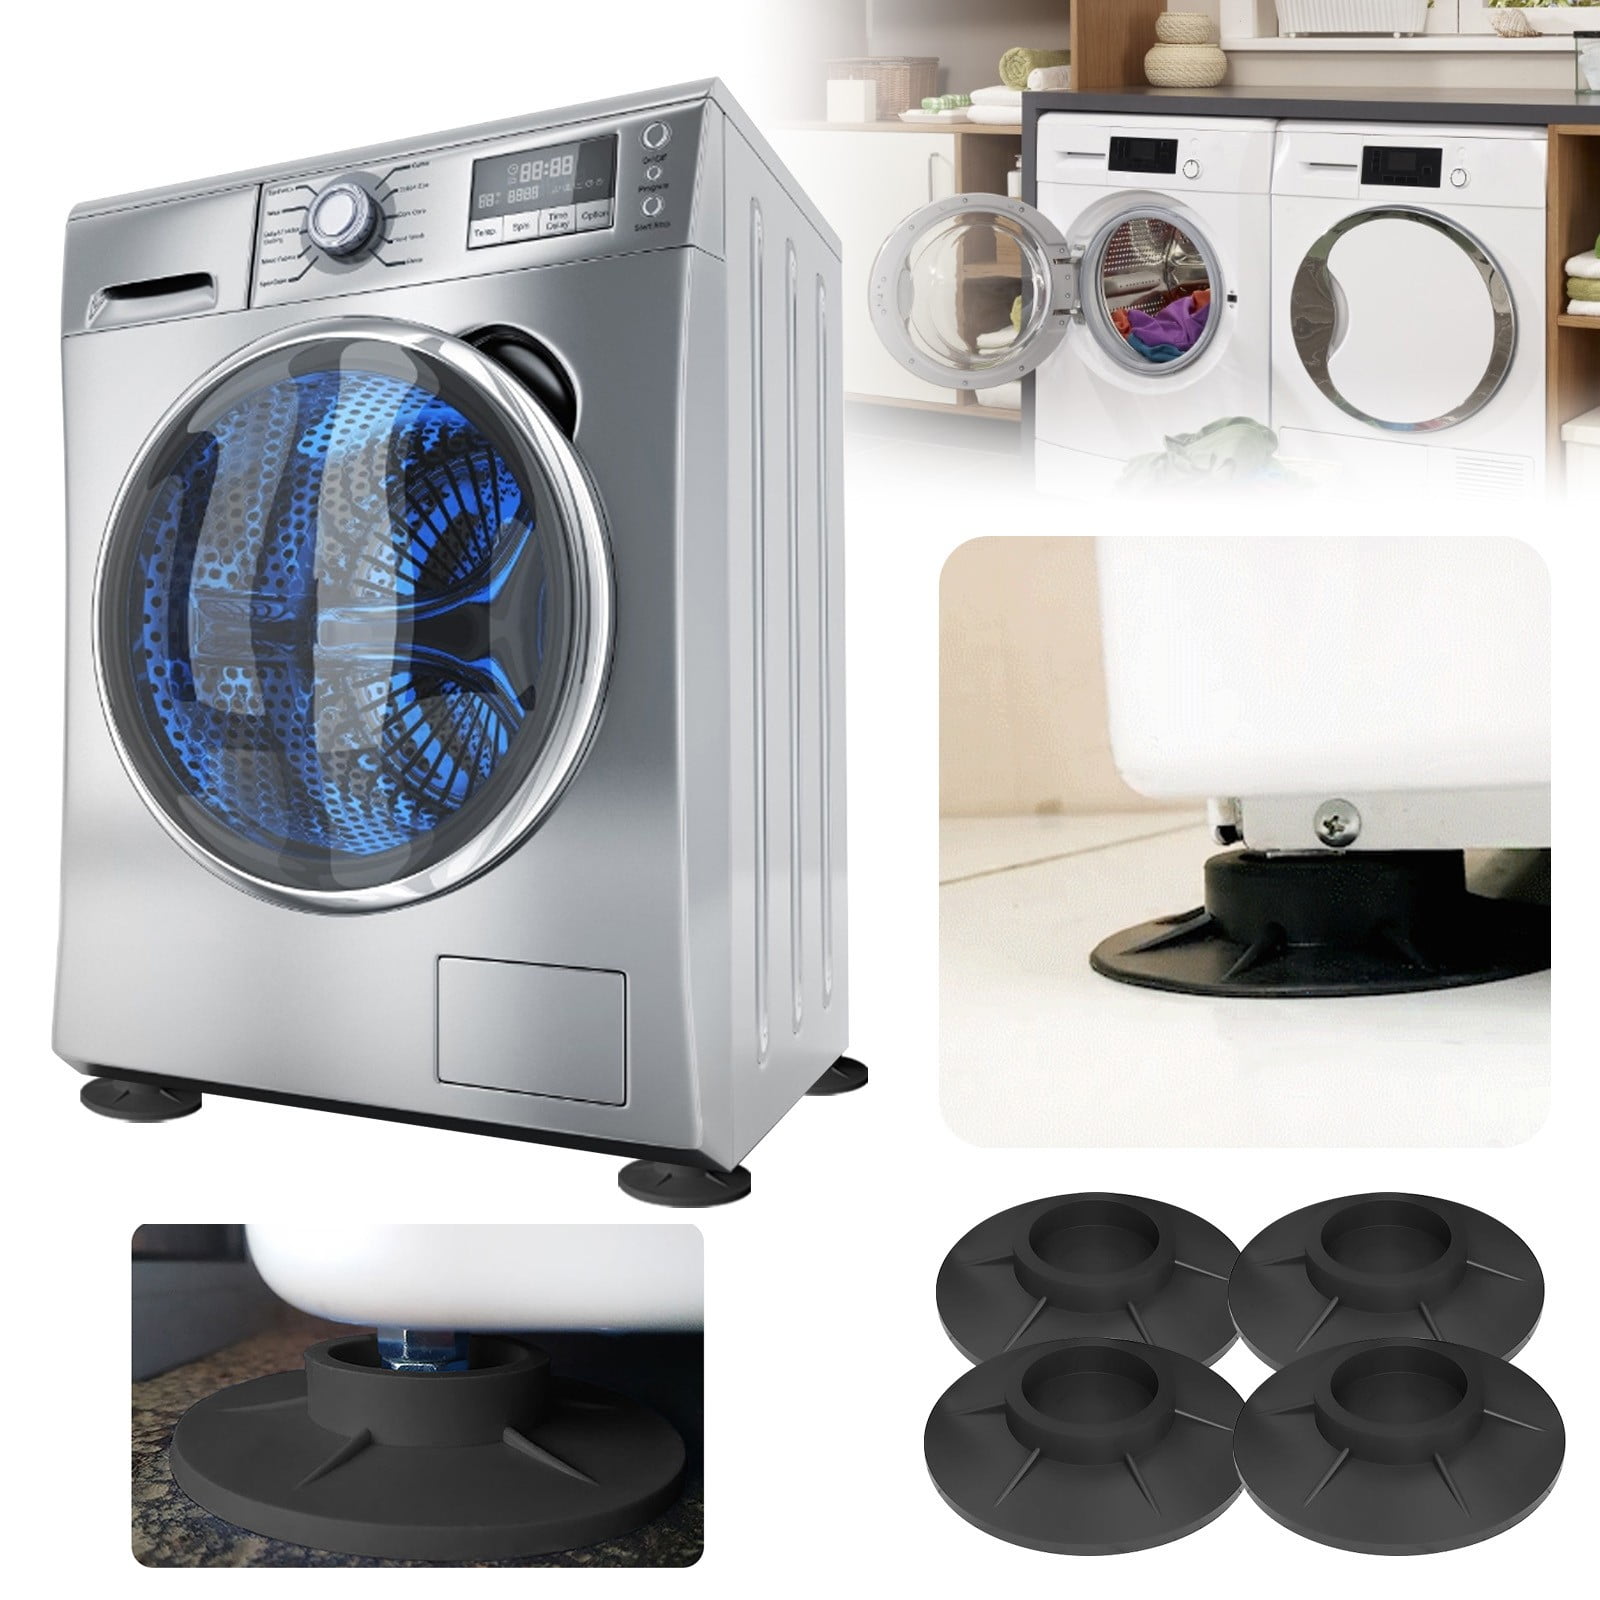 Details about   Durable Washing Machine Cover Waterproof Dustproof For Front Load Washer/Dryer 